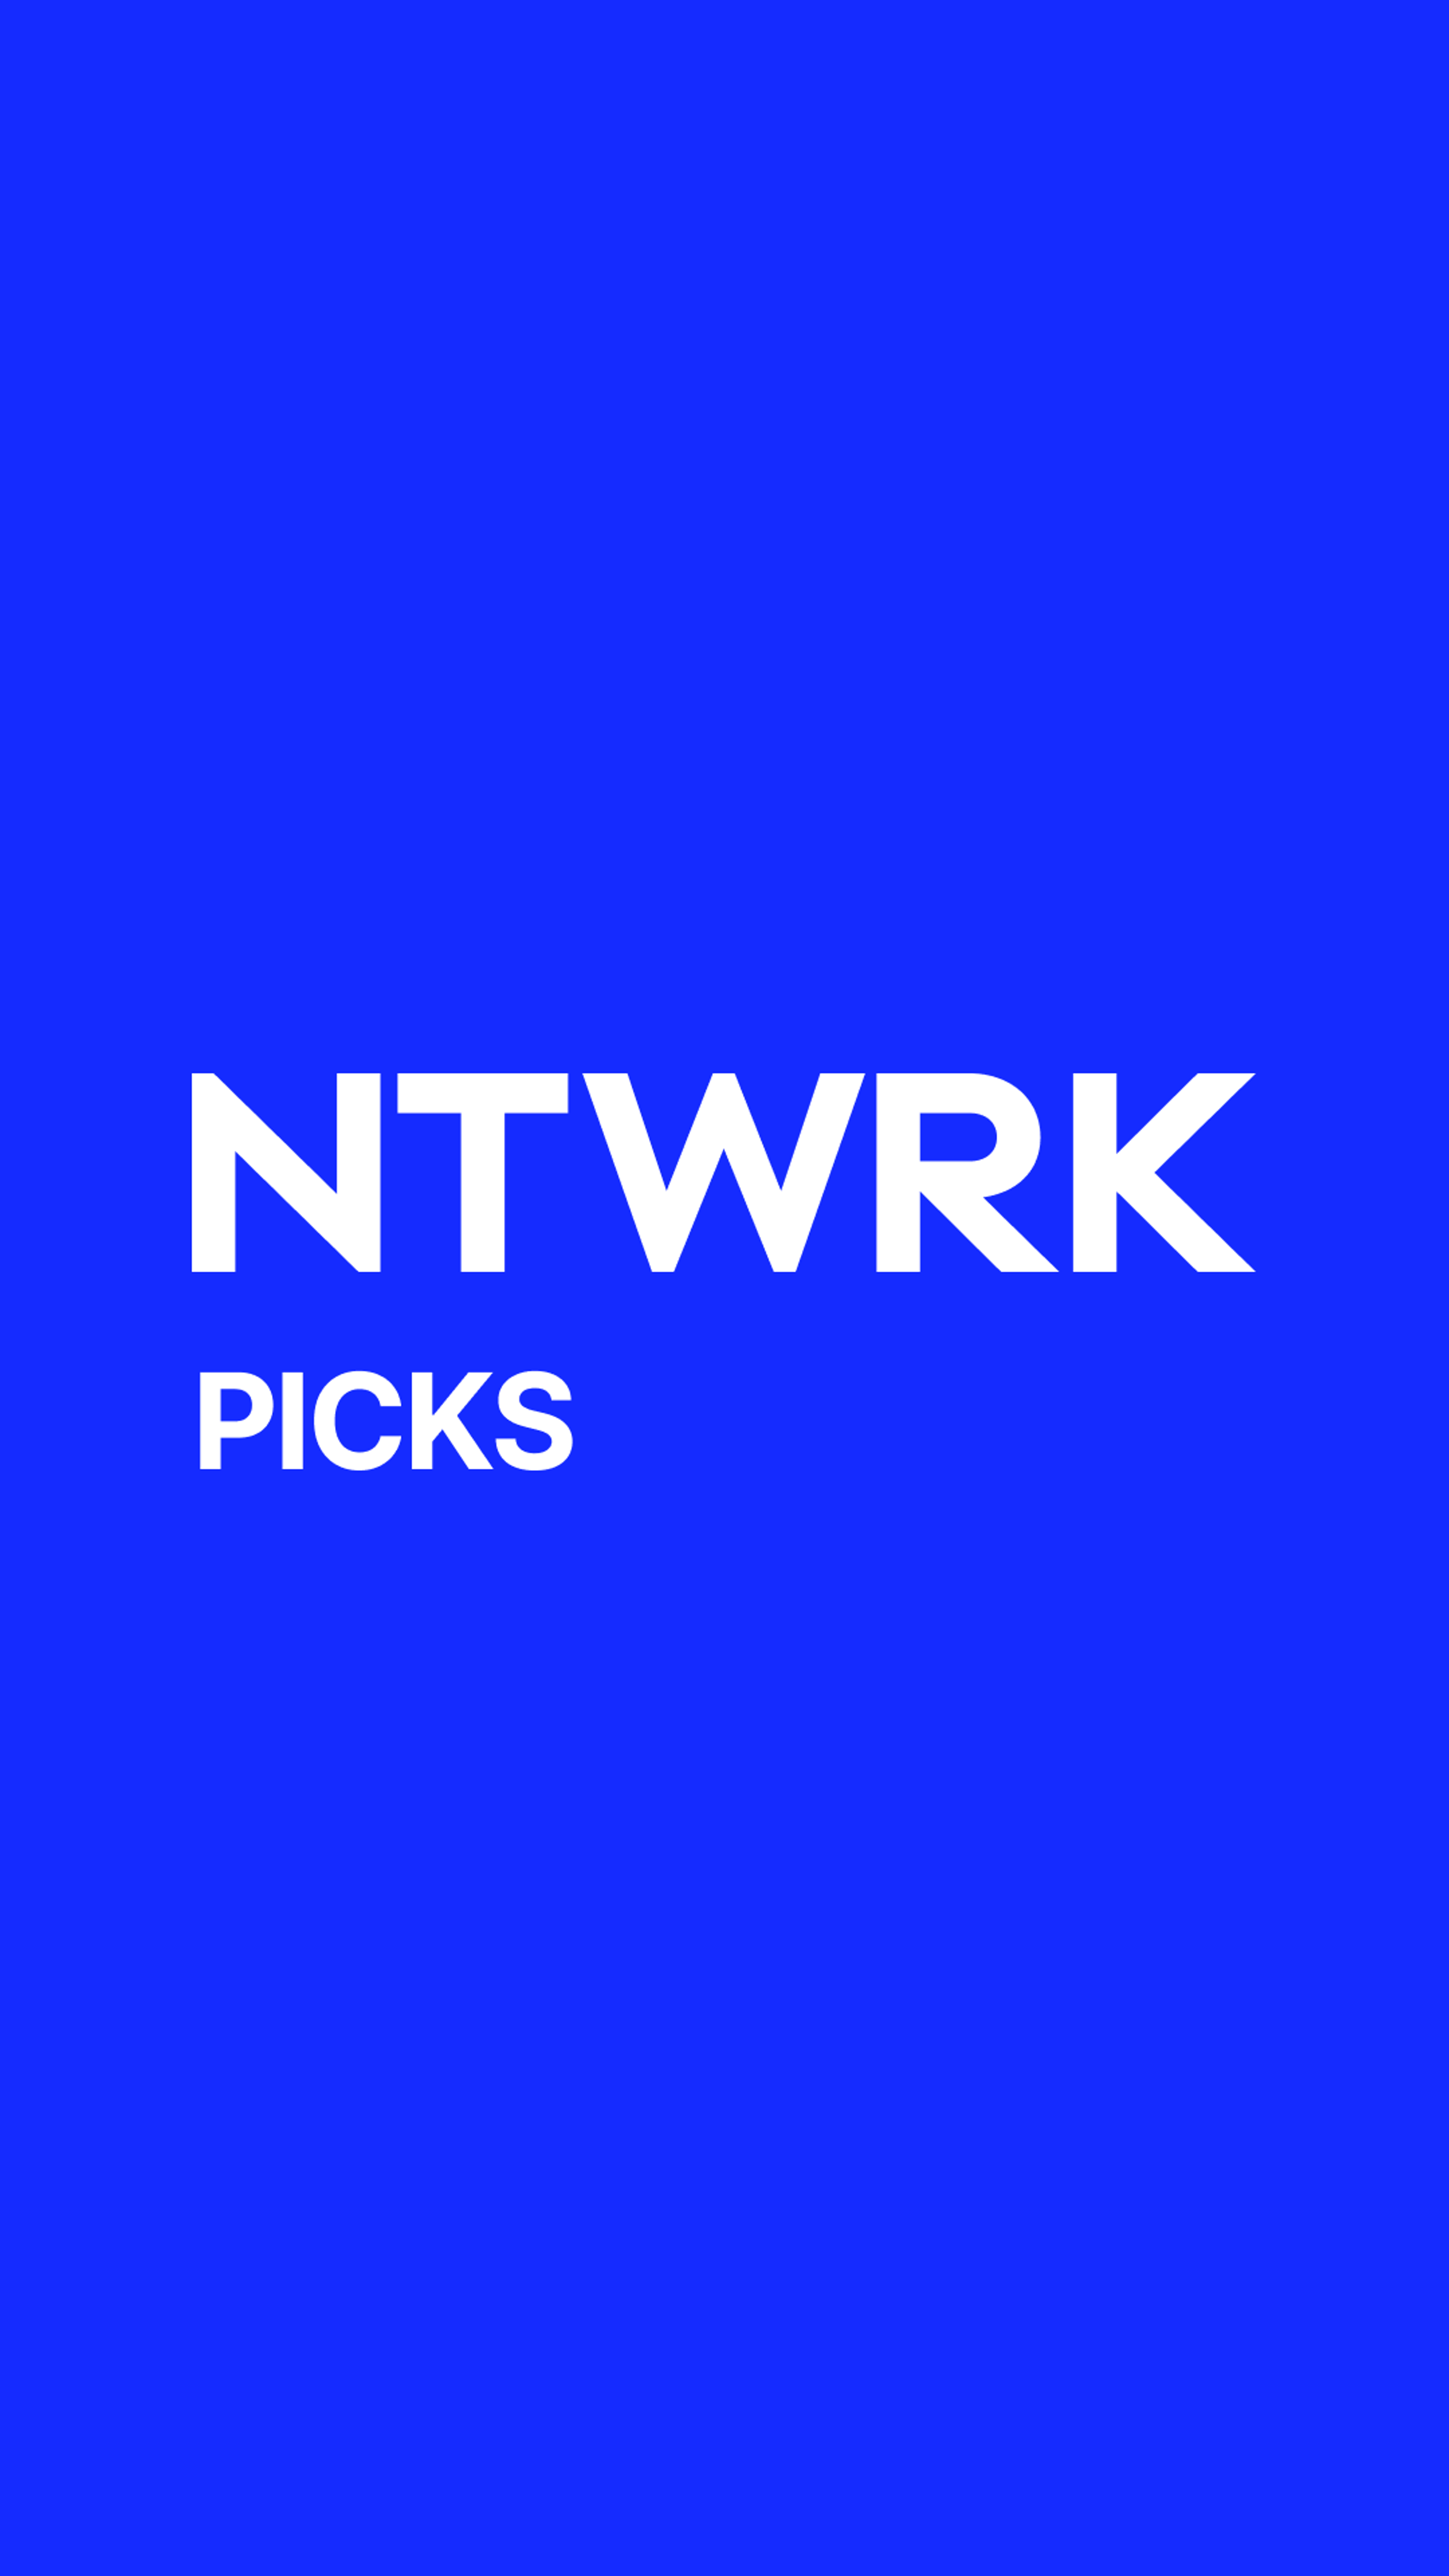 Preview image for the show titled "NTWRK Picks: Denim Tears" at May 20, 2024